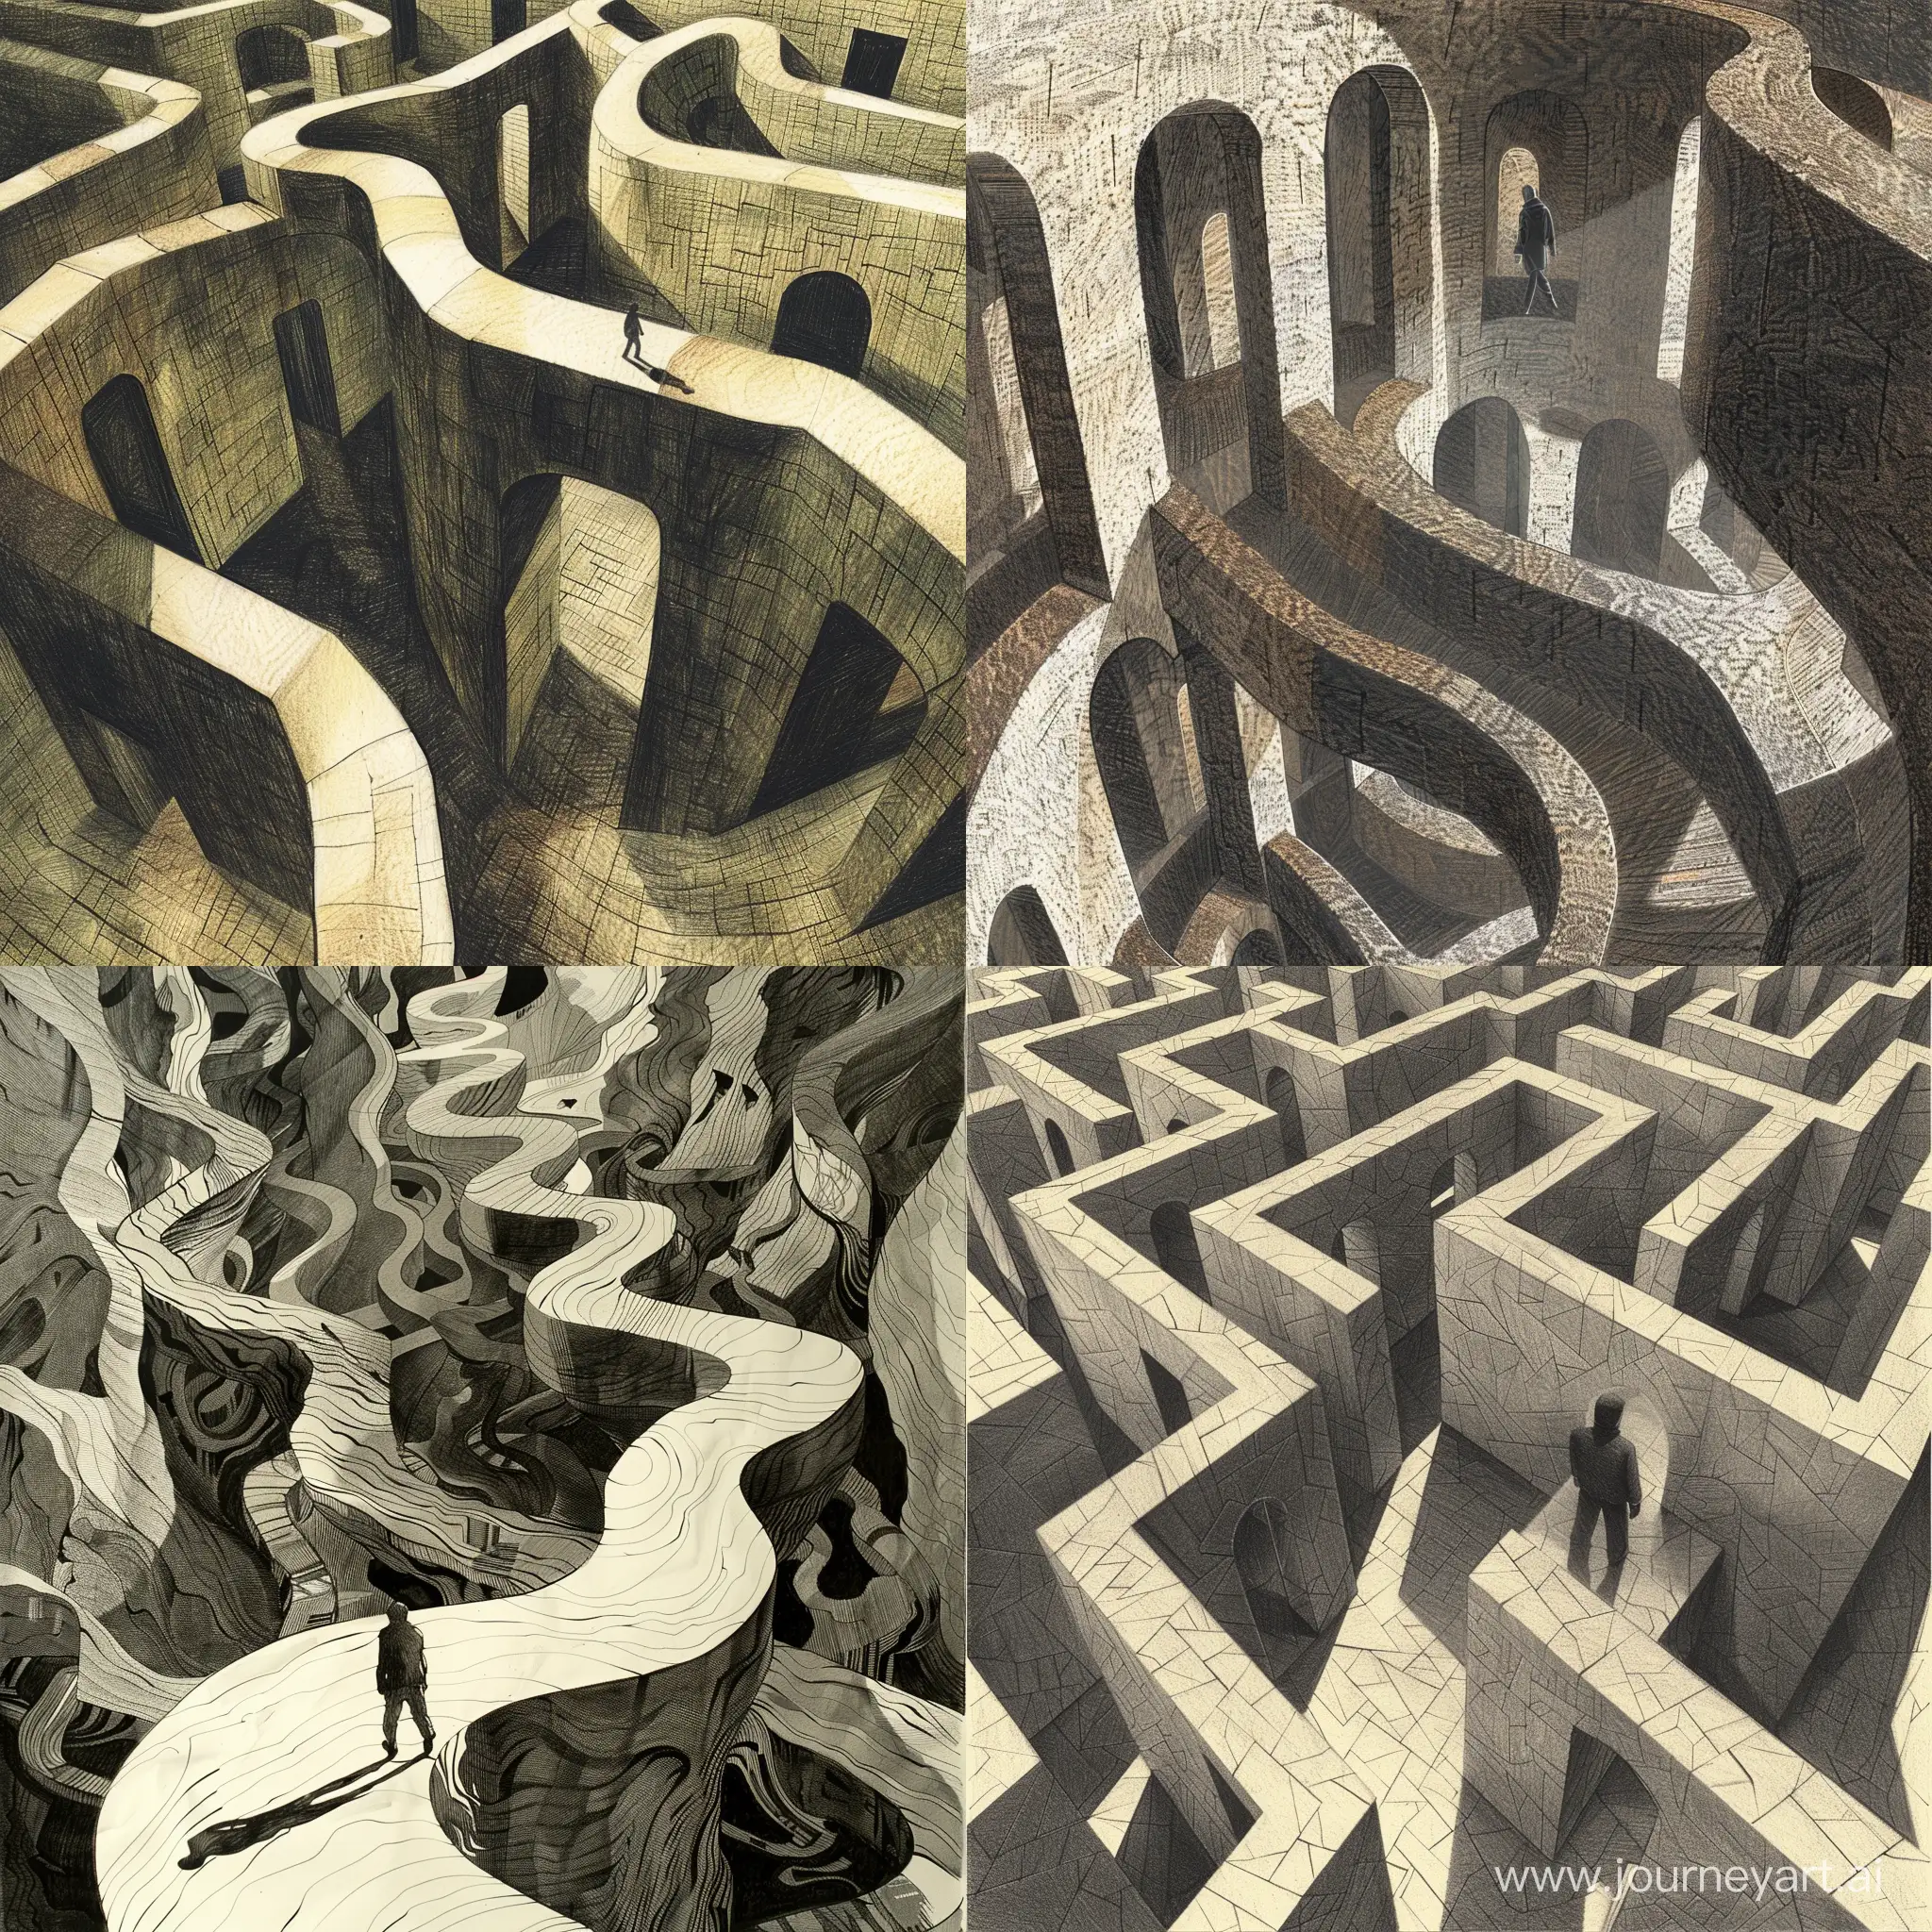 A labyrinthine landscape unfolds, combining the intricate detailing of M.C. Escher with the emotional depth of Edward Hopper. The central figure navigates a maze of twisted corridors, symbolizing the complexity of psychological despair. The play of light and shadows, inspired by chiaroscuro techniques, adds depth to the emotional journey. The medium involves a fusion of pen and ink drawings with digital enhancements, creating a visually intricate portrayal of the labyrinth within the mind.